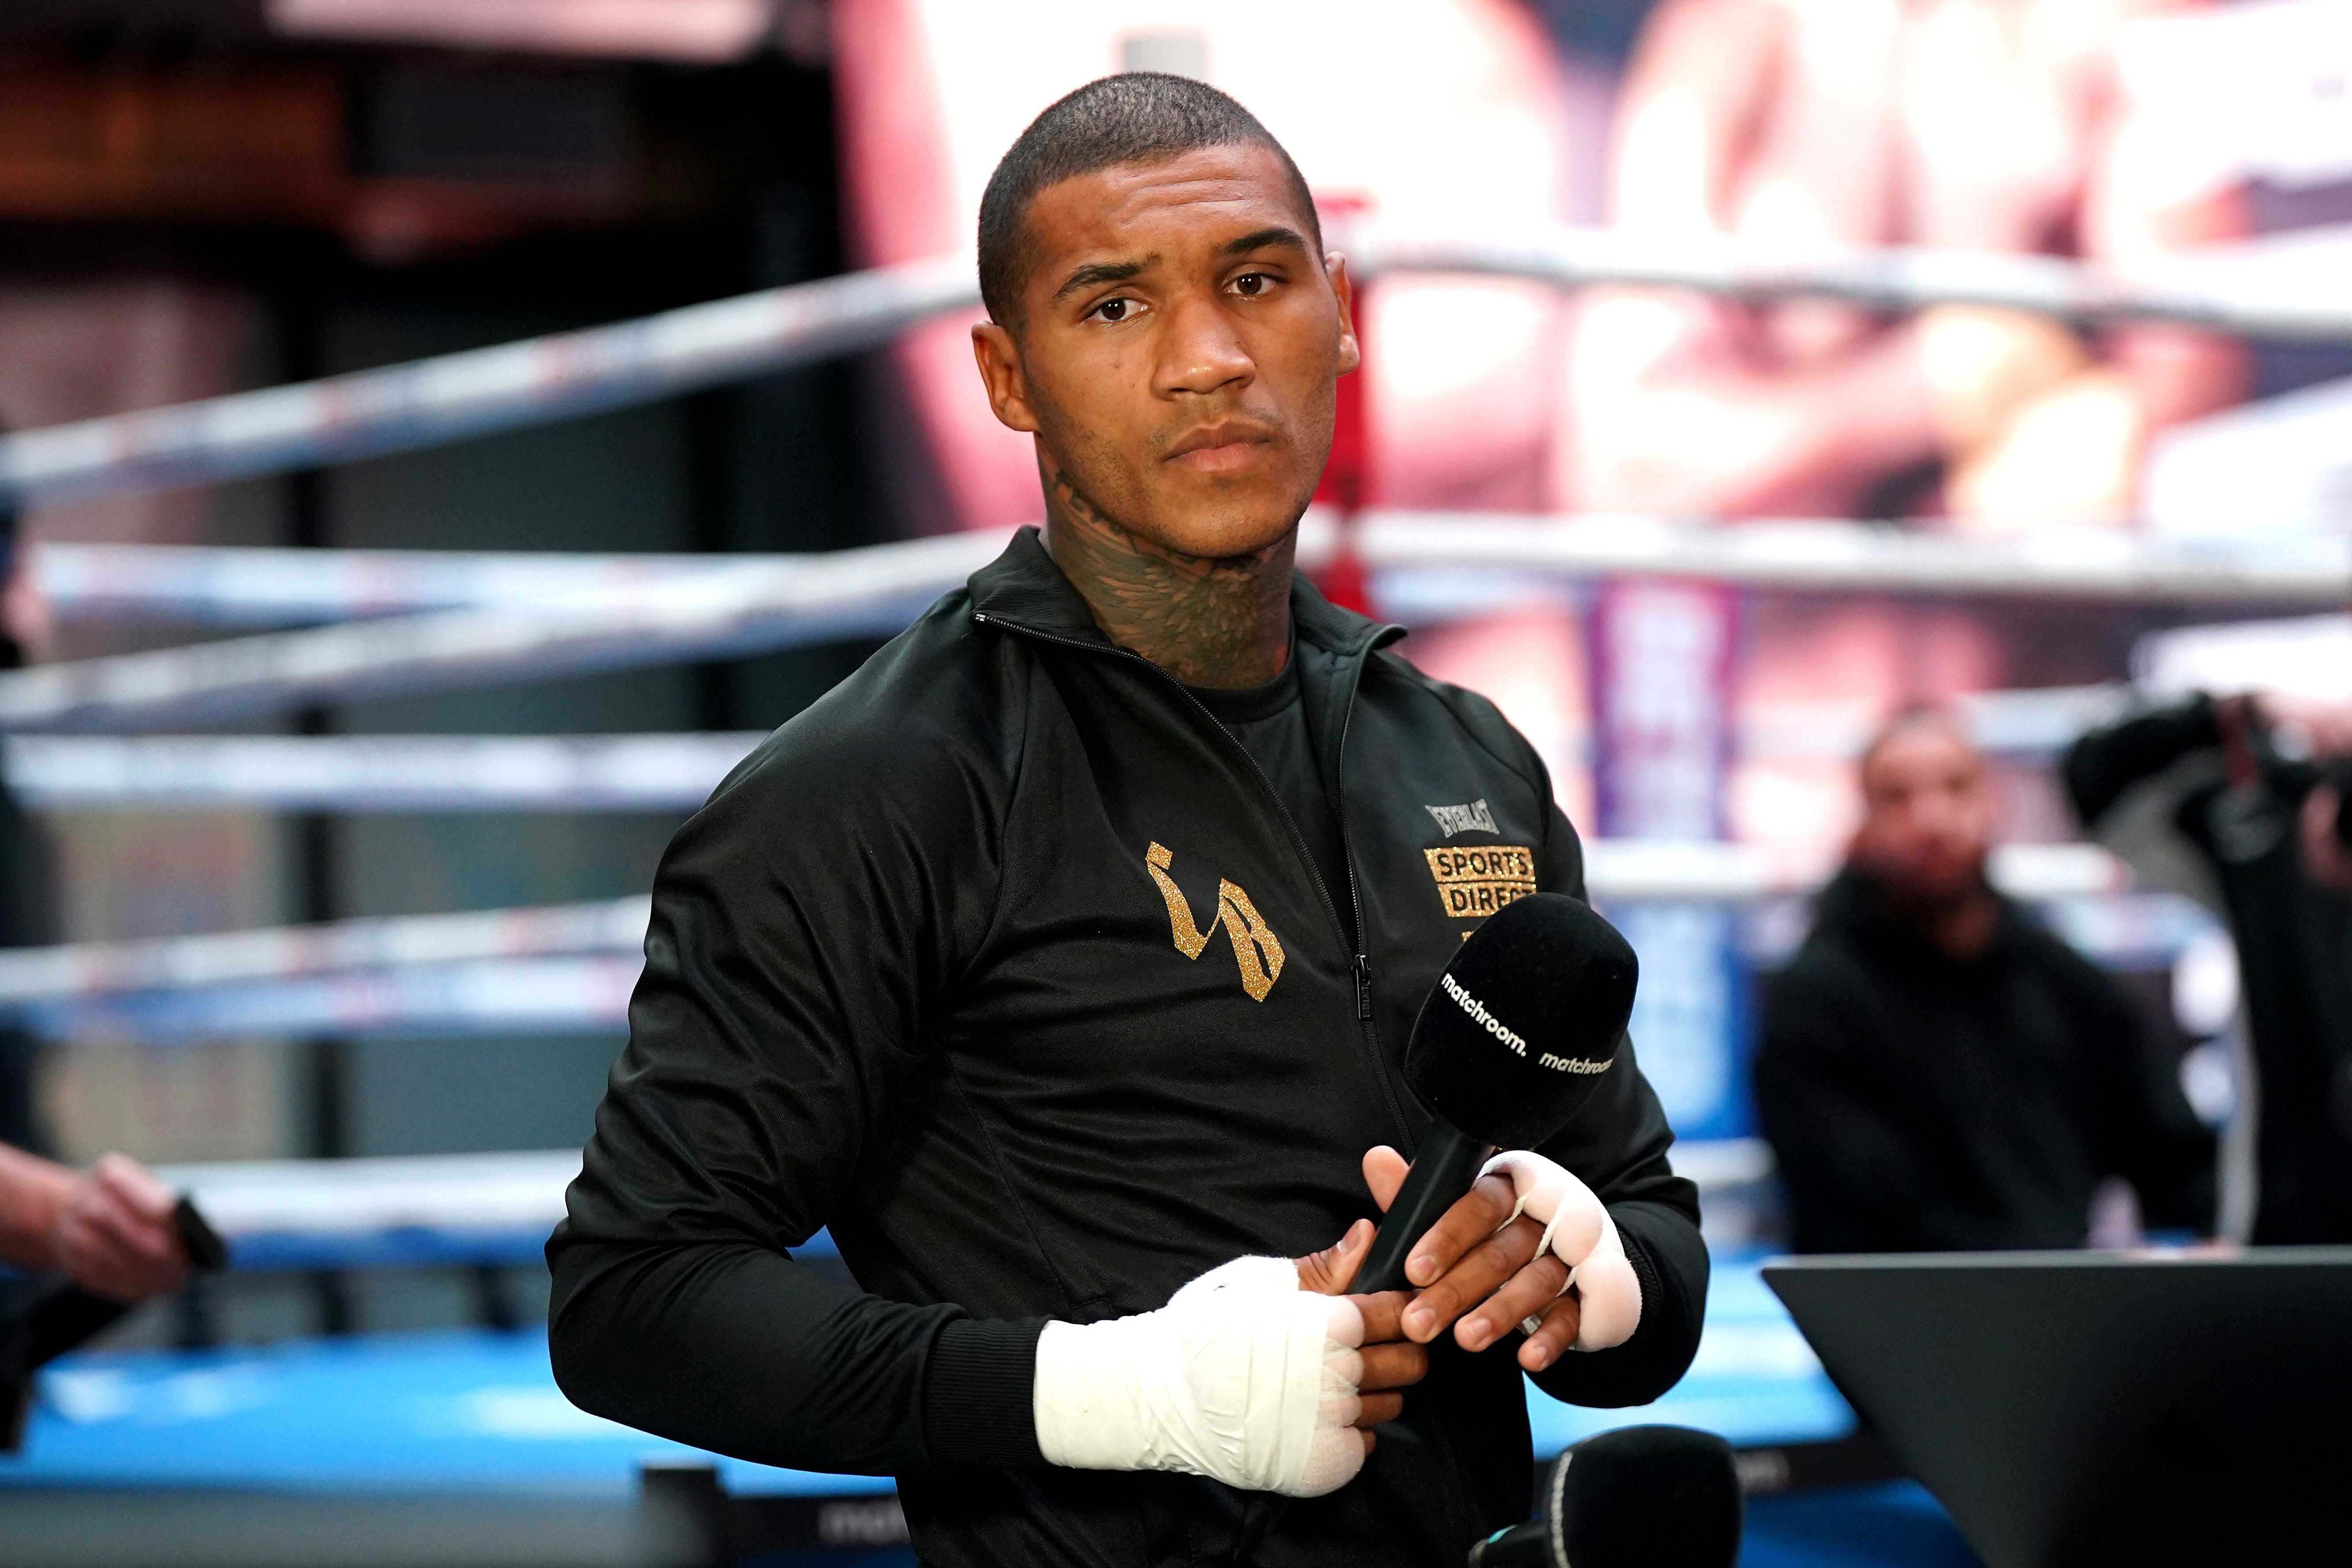 Conor Benn reveals he failed two anti-doping tests before Chris Eubank Jr fight The Independent